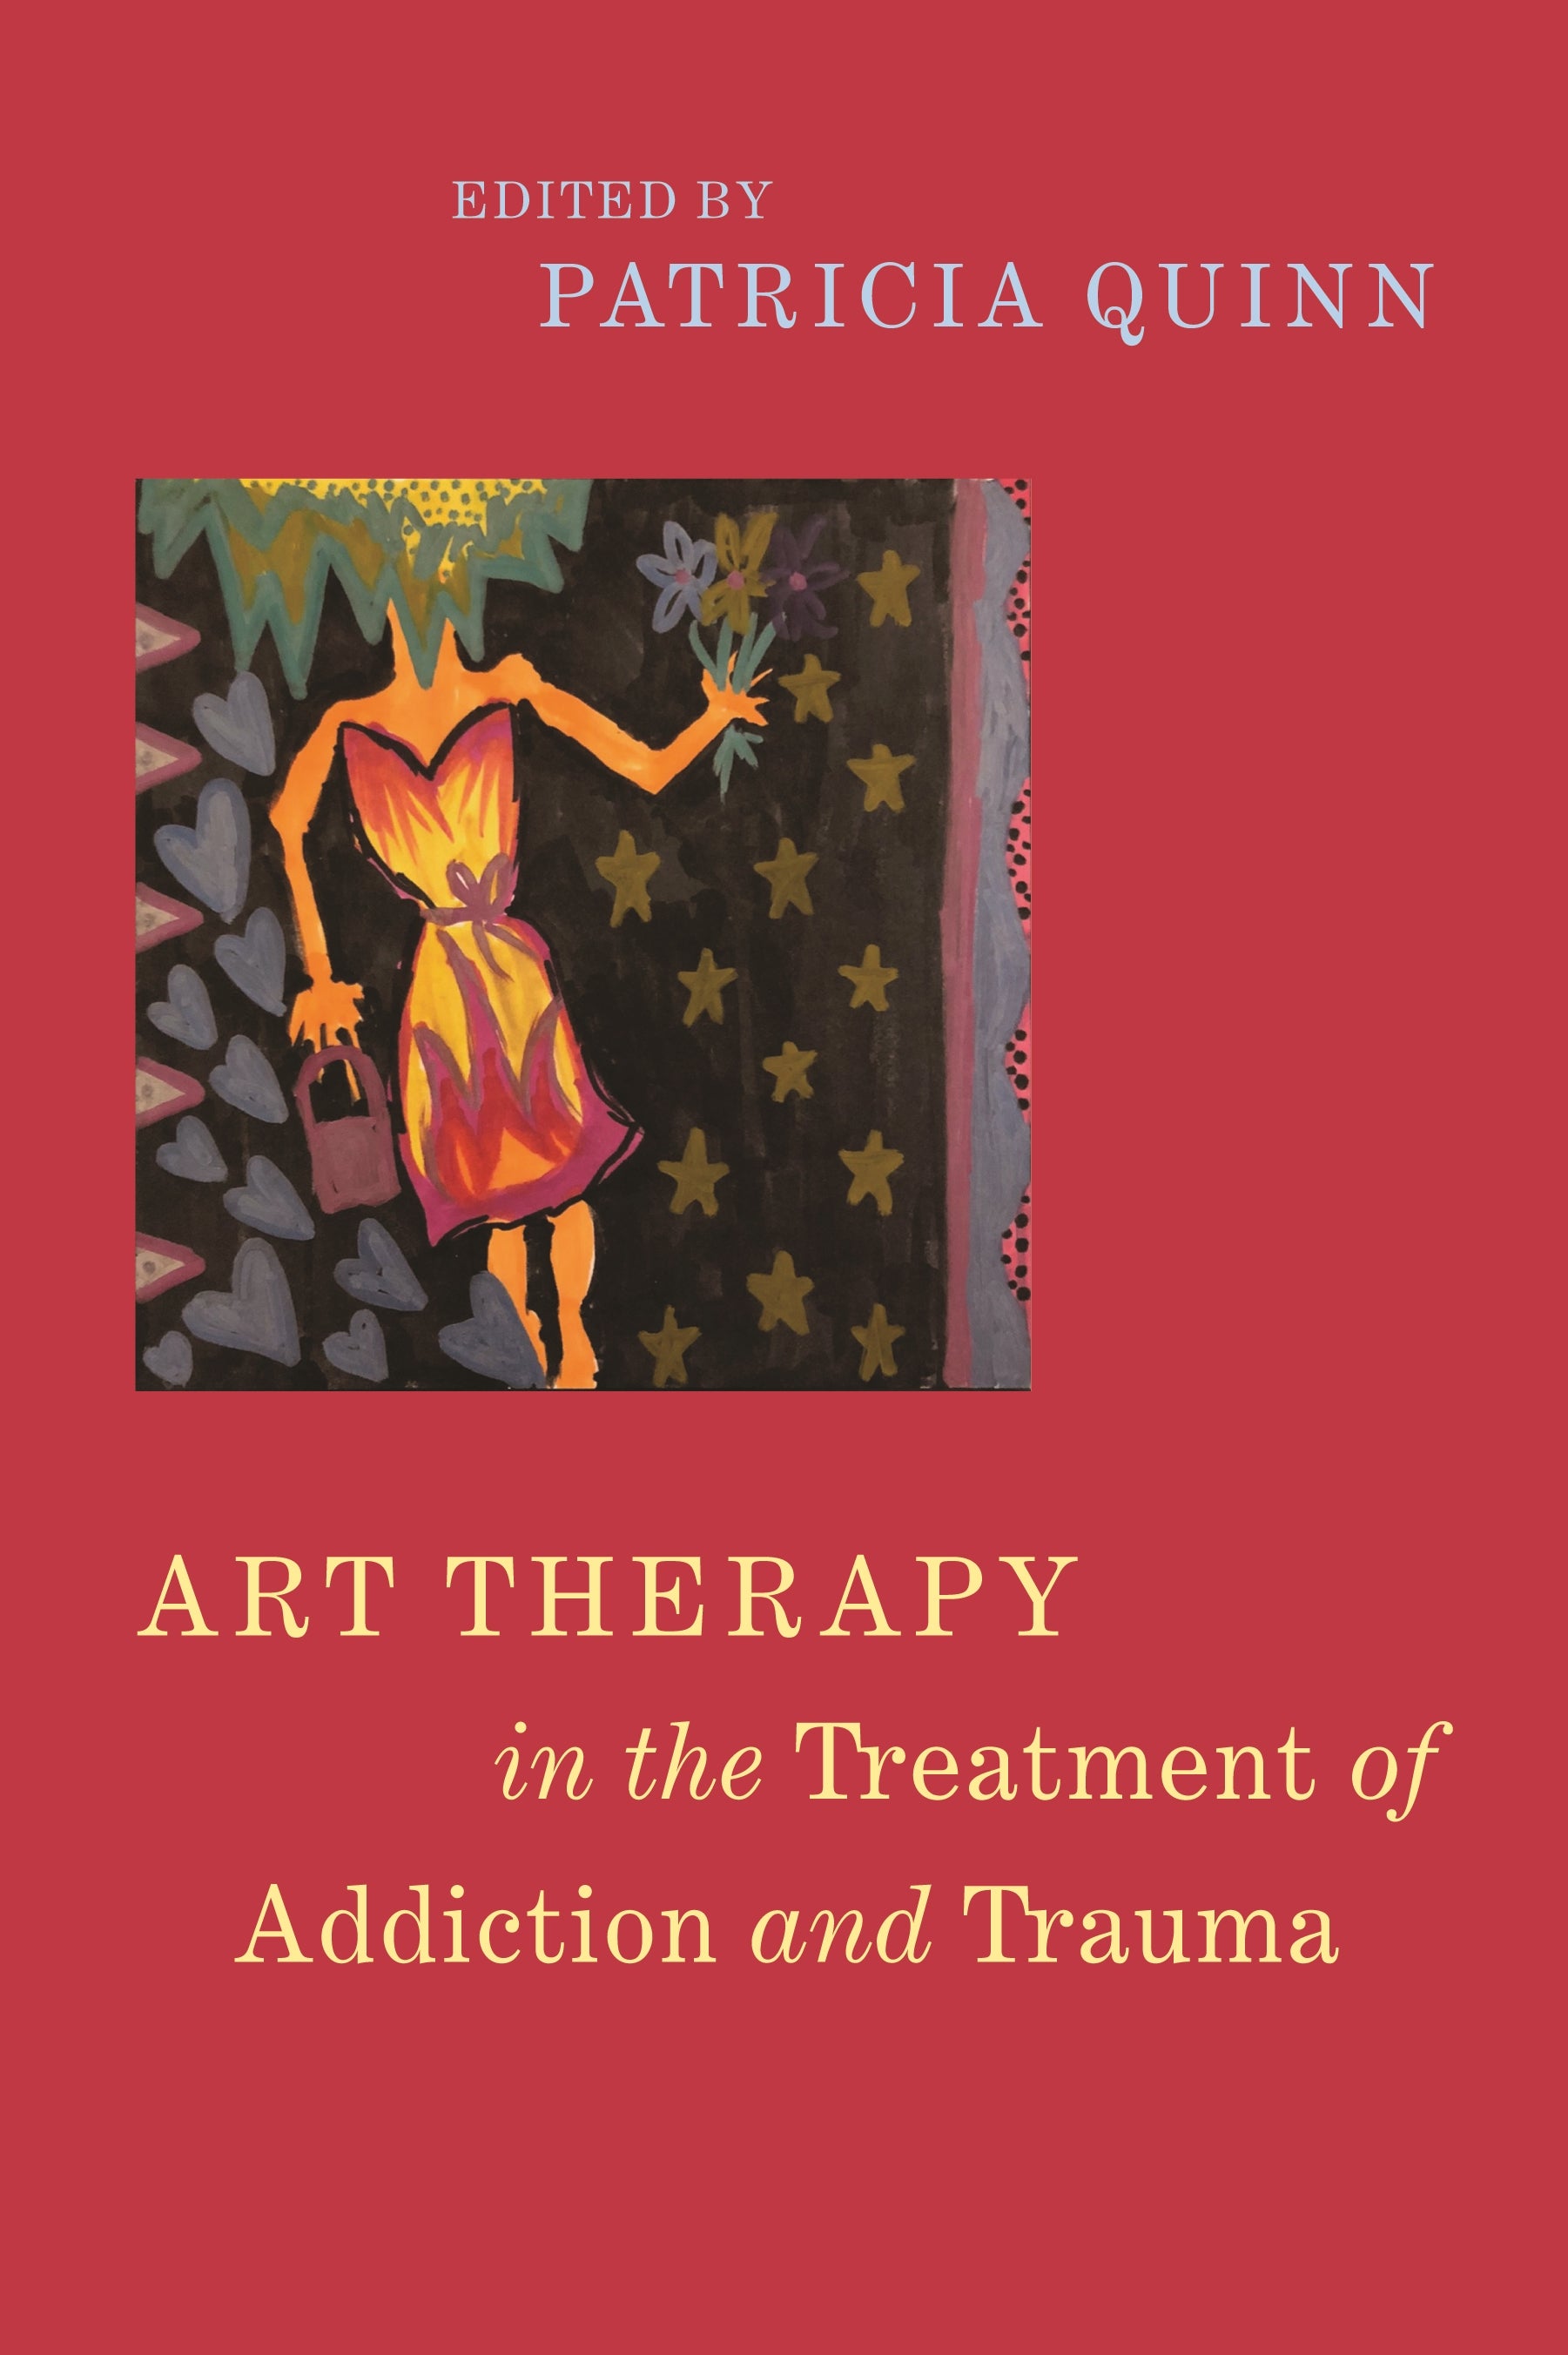 Art Therapy in the Treatment of Addiction and Trauma by Patricia Quinn